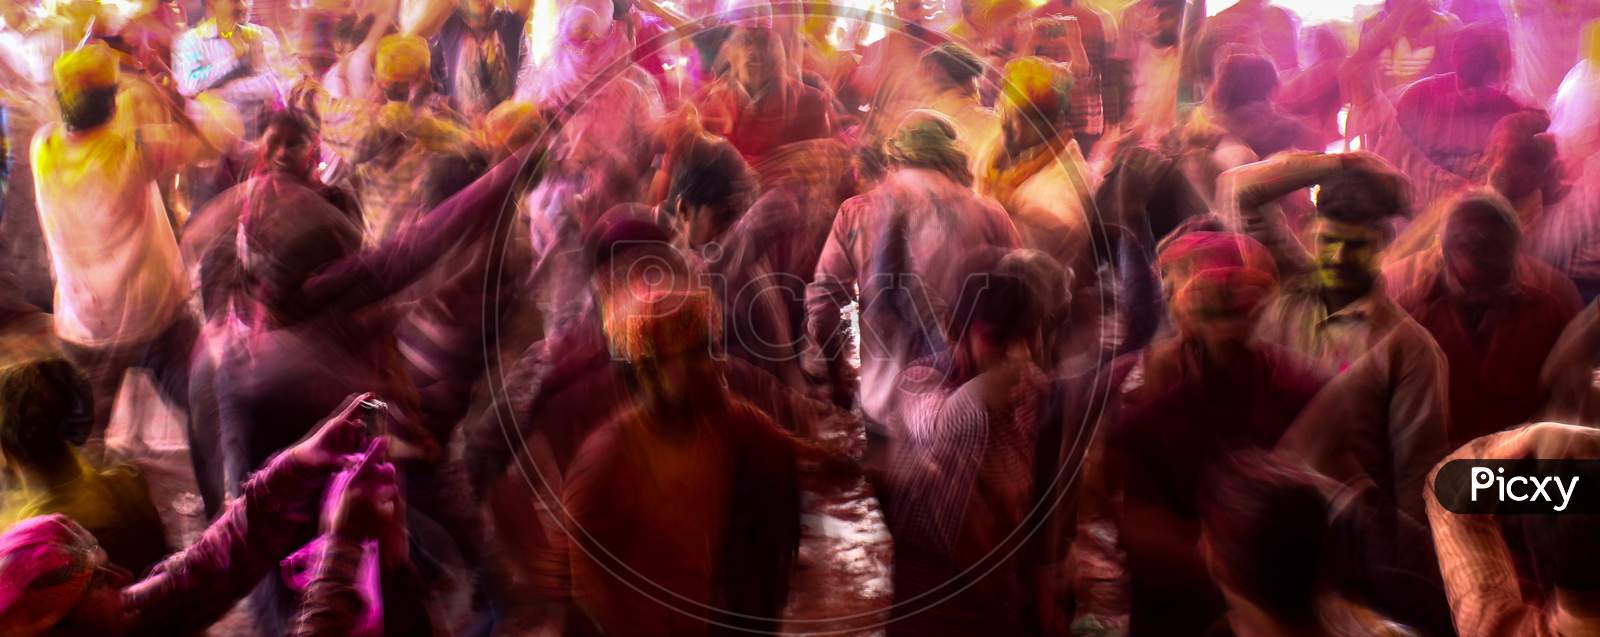 Mathura, Uttar Pradesh/ India- January 6 2020: A Crowd Of People Raising Their Hands Up And Enjoying Music On The Street Of Mathura Celebrating Holi Festival With Color Powder Captured In Slow Shutter Speed.